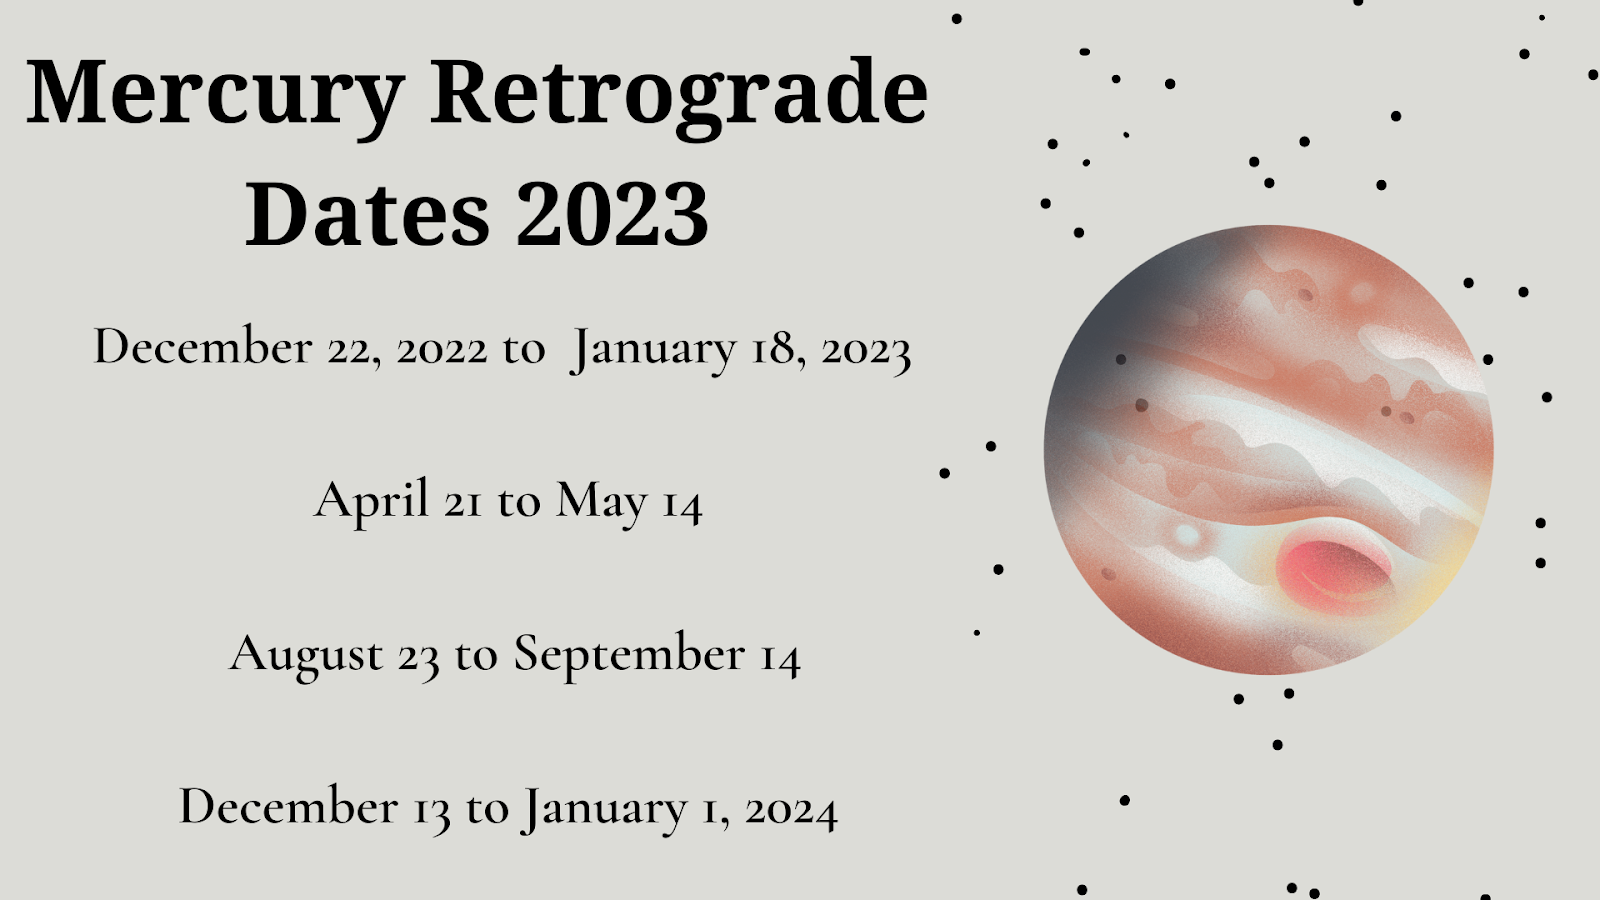 Image showing planet against stars and Mercury retrograde dates for 2023